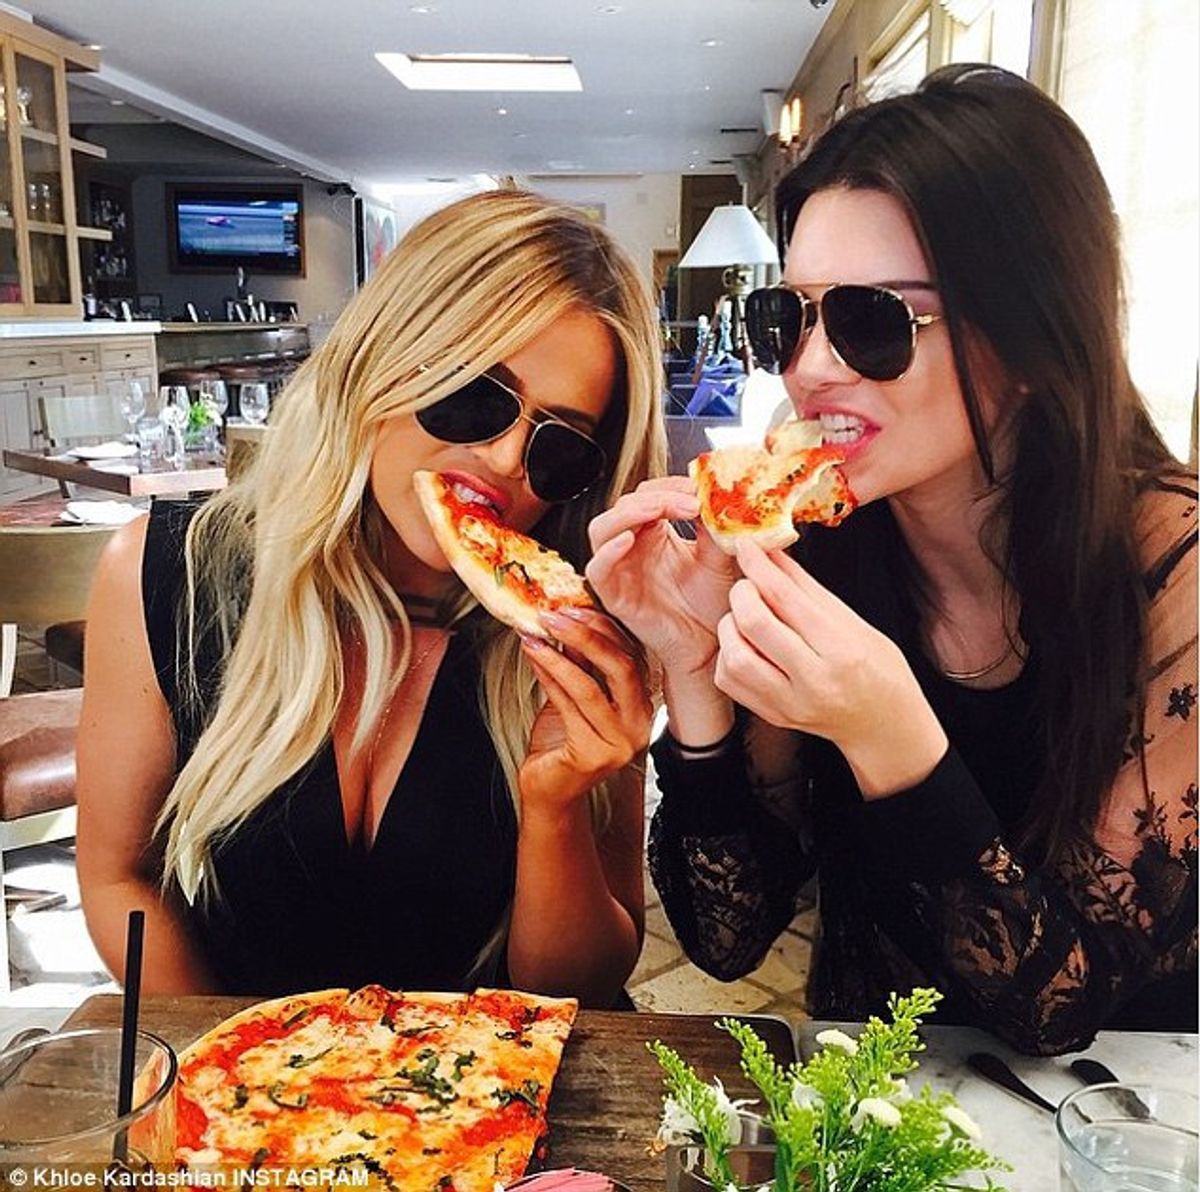 5 Reasons Pizza Is Better Than Friends